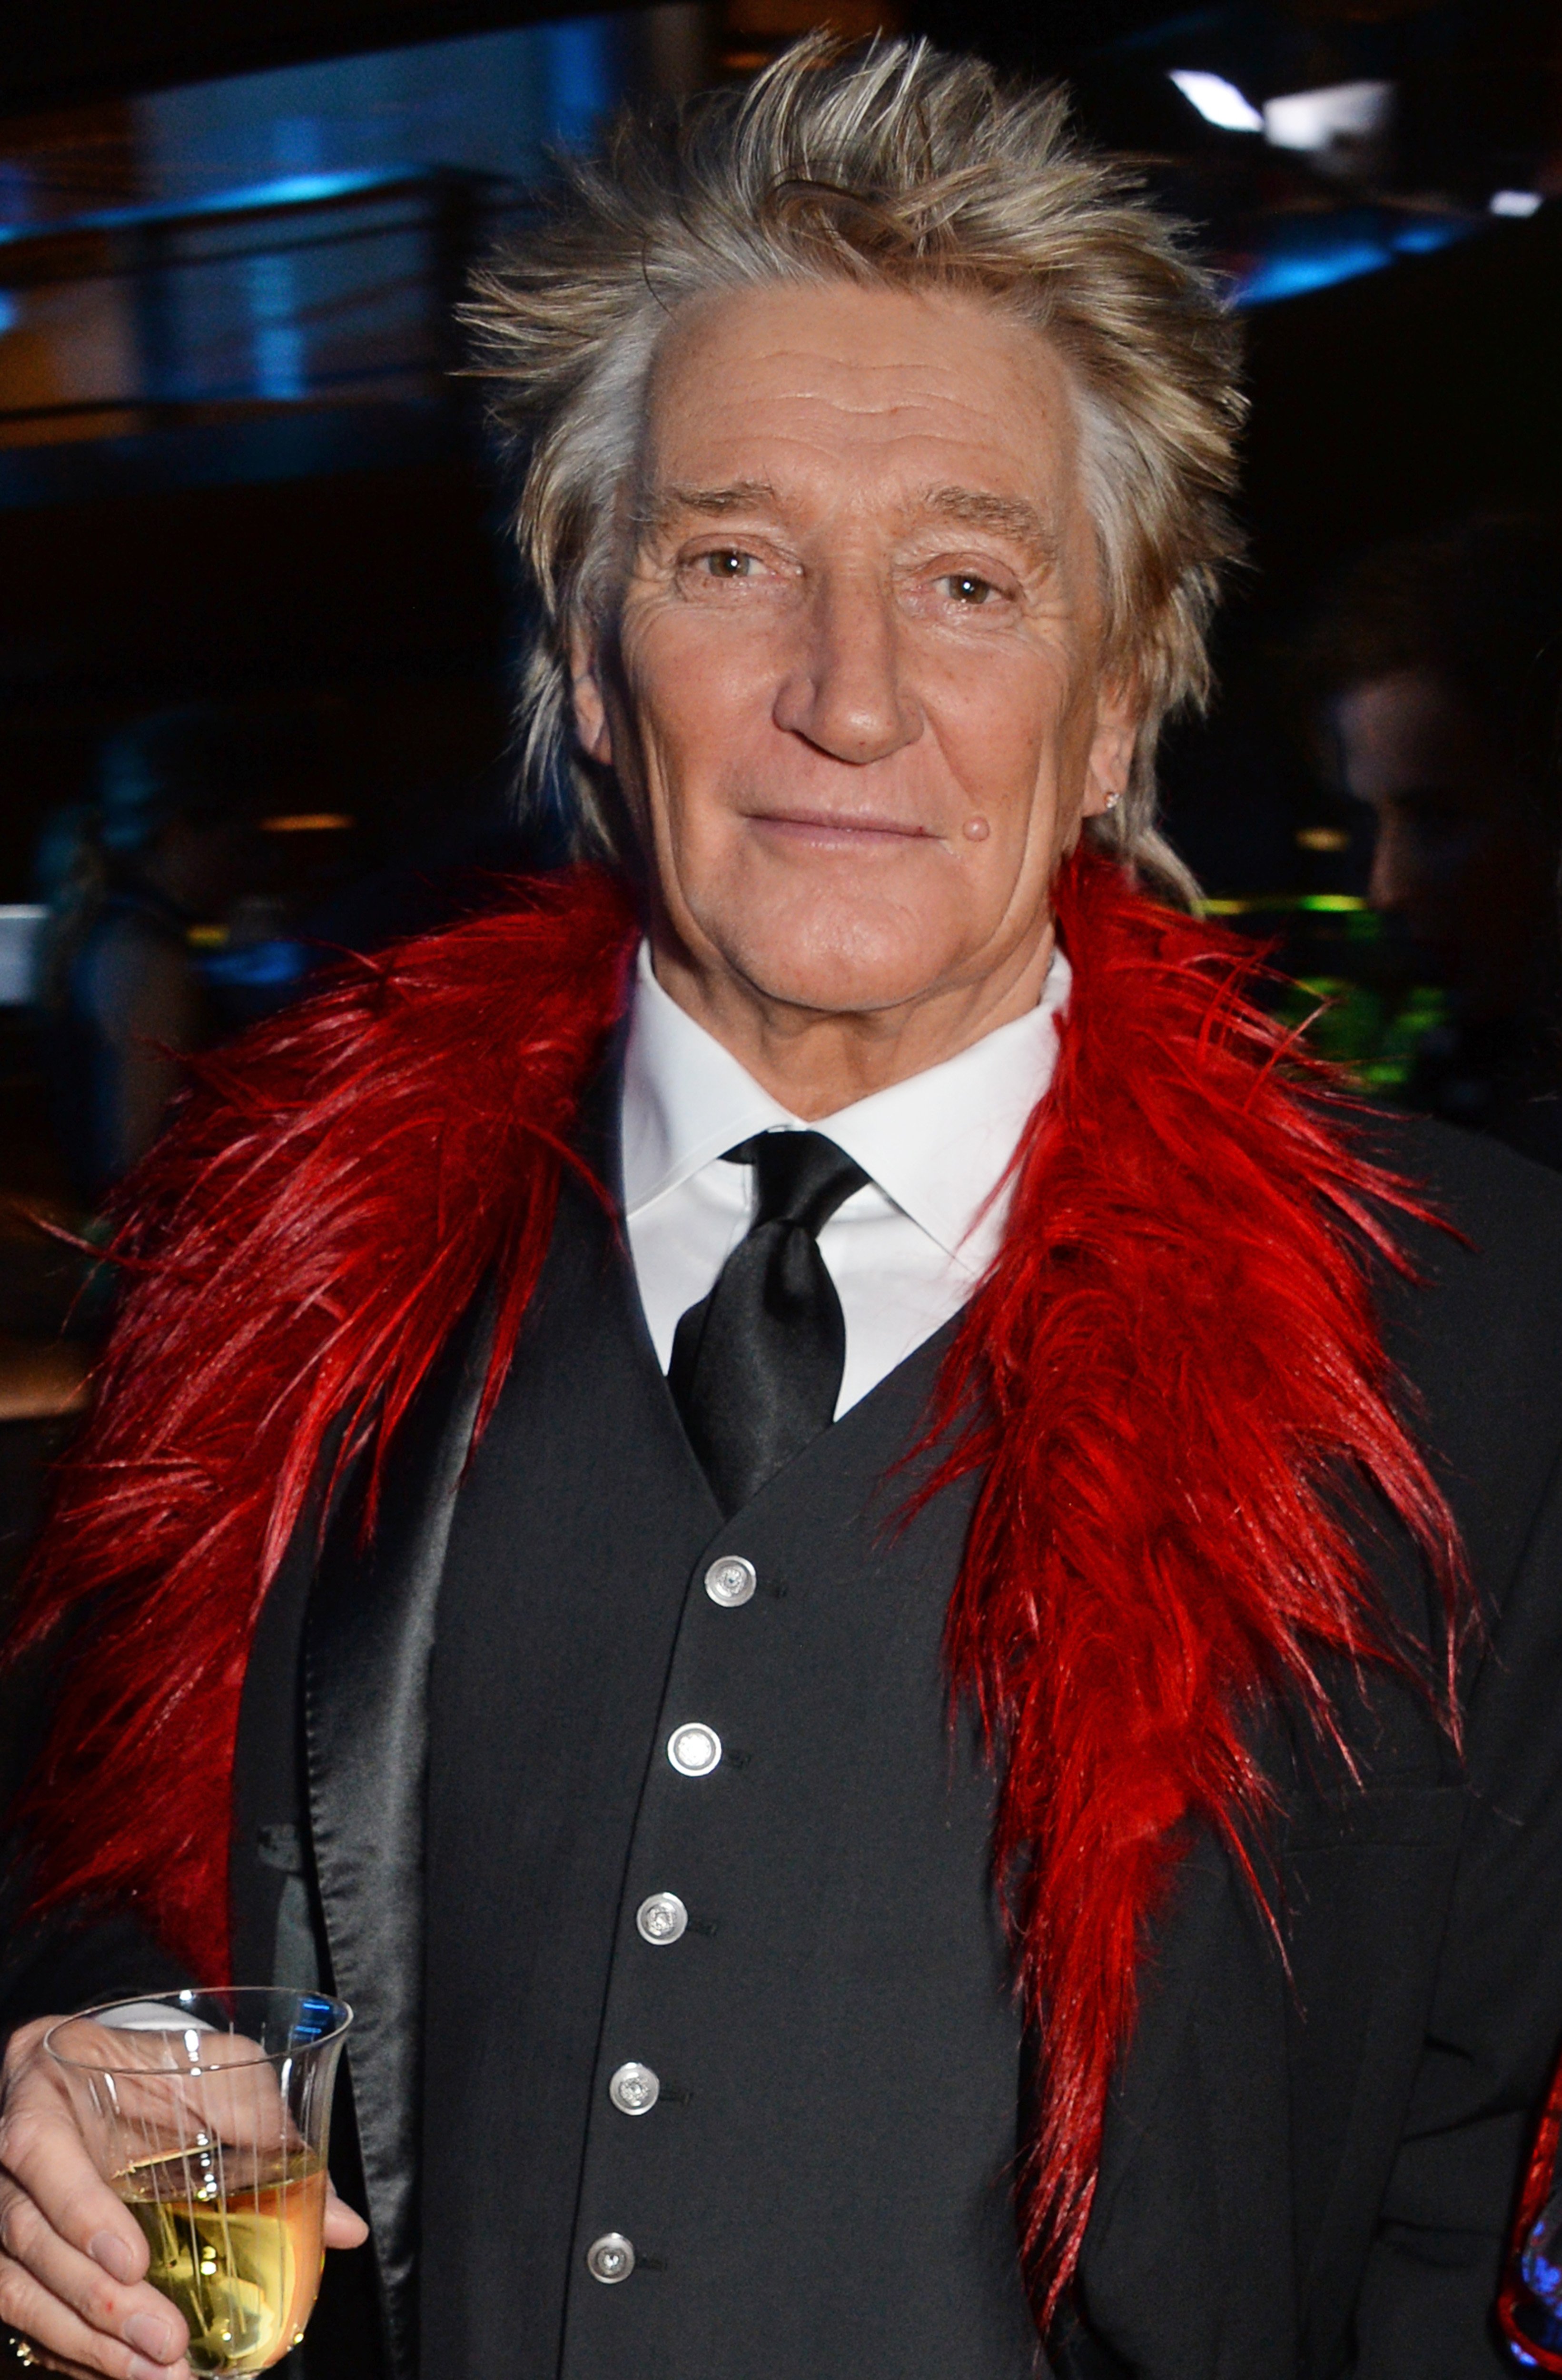 Sir Rod Stewart attends the Bloomberg x Vanity Fair Climate Exchange gala dinner 2018 at Bloomberg London on December 11, 2018 | Photo: GettyImages